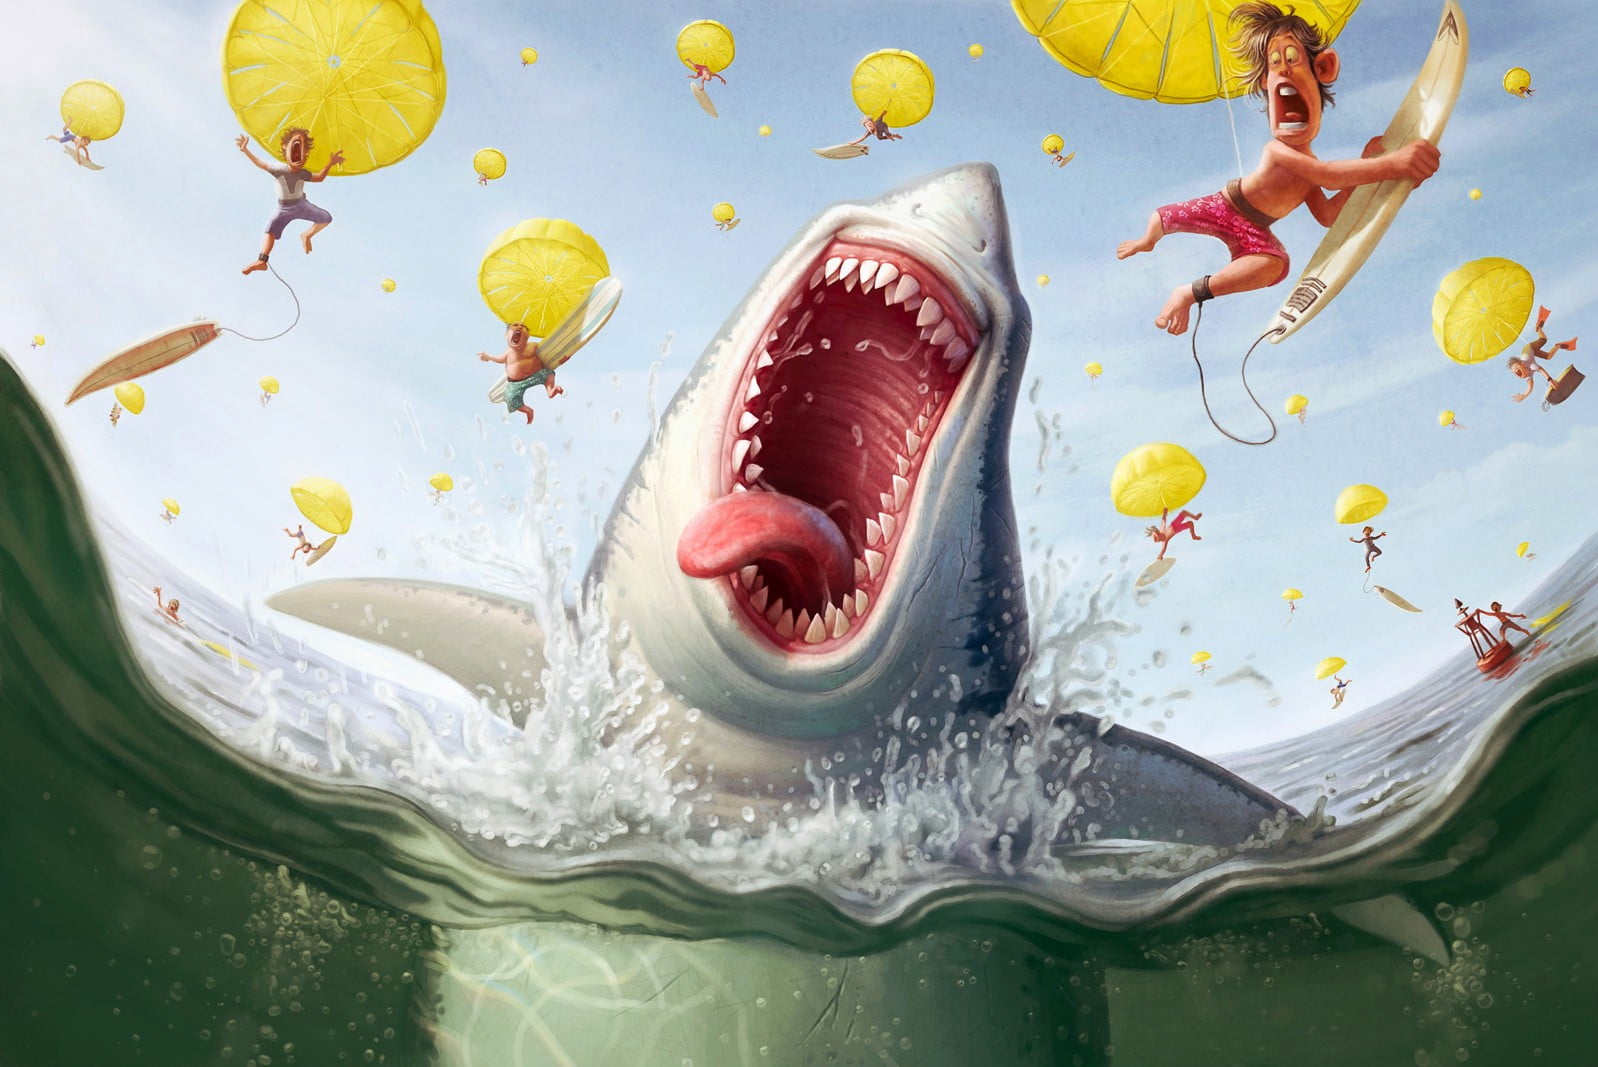 shark, parachutes, people, sea, water, one person, mouth open